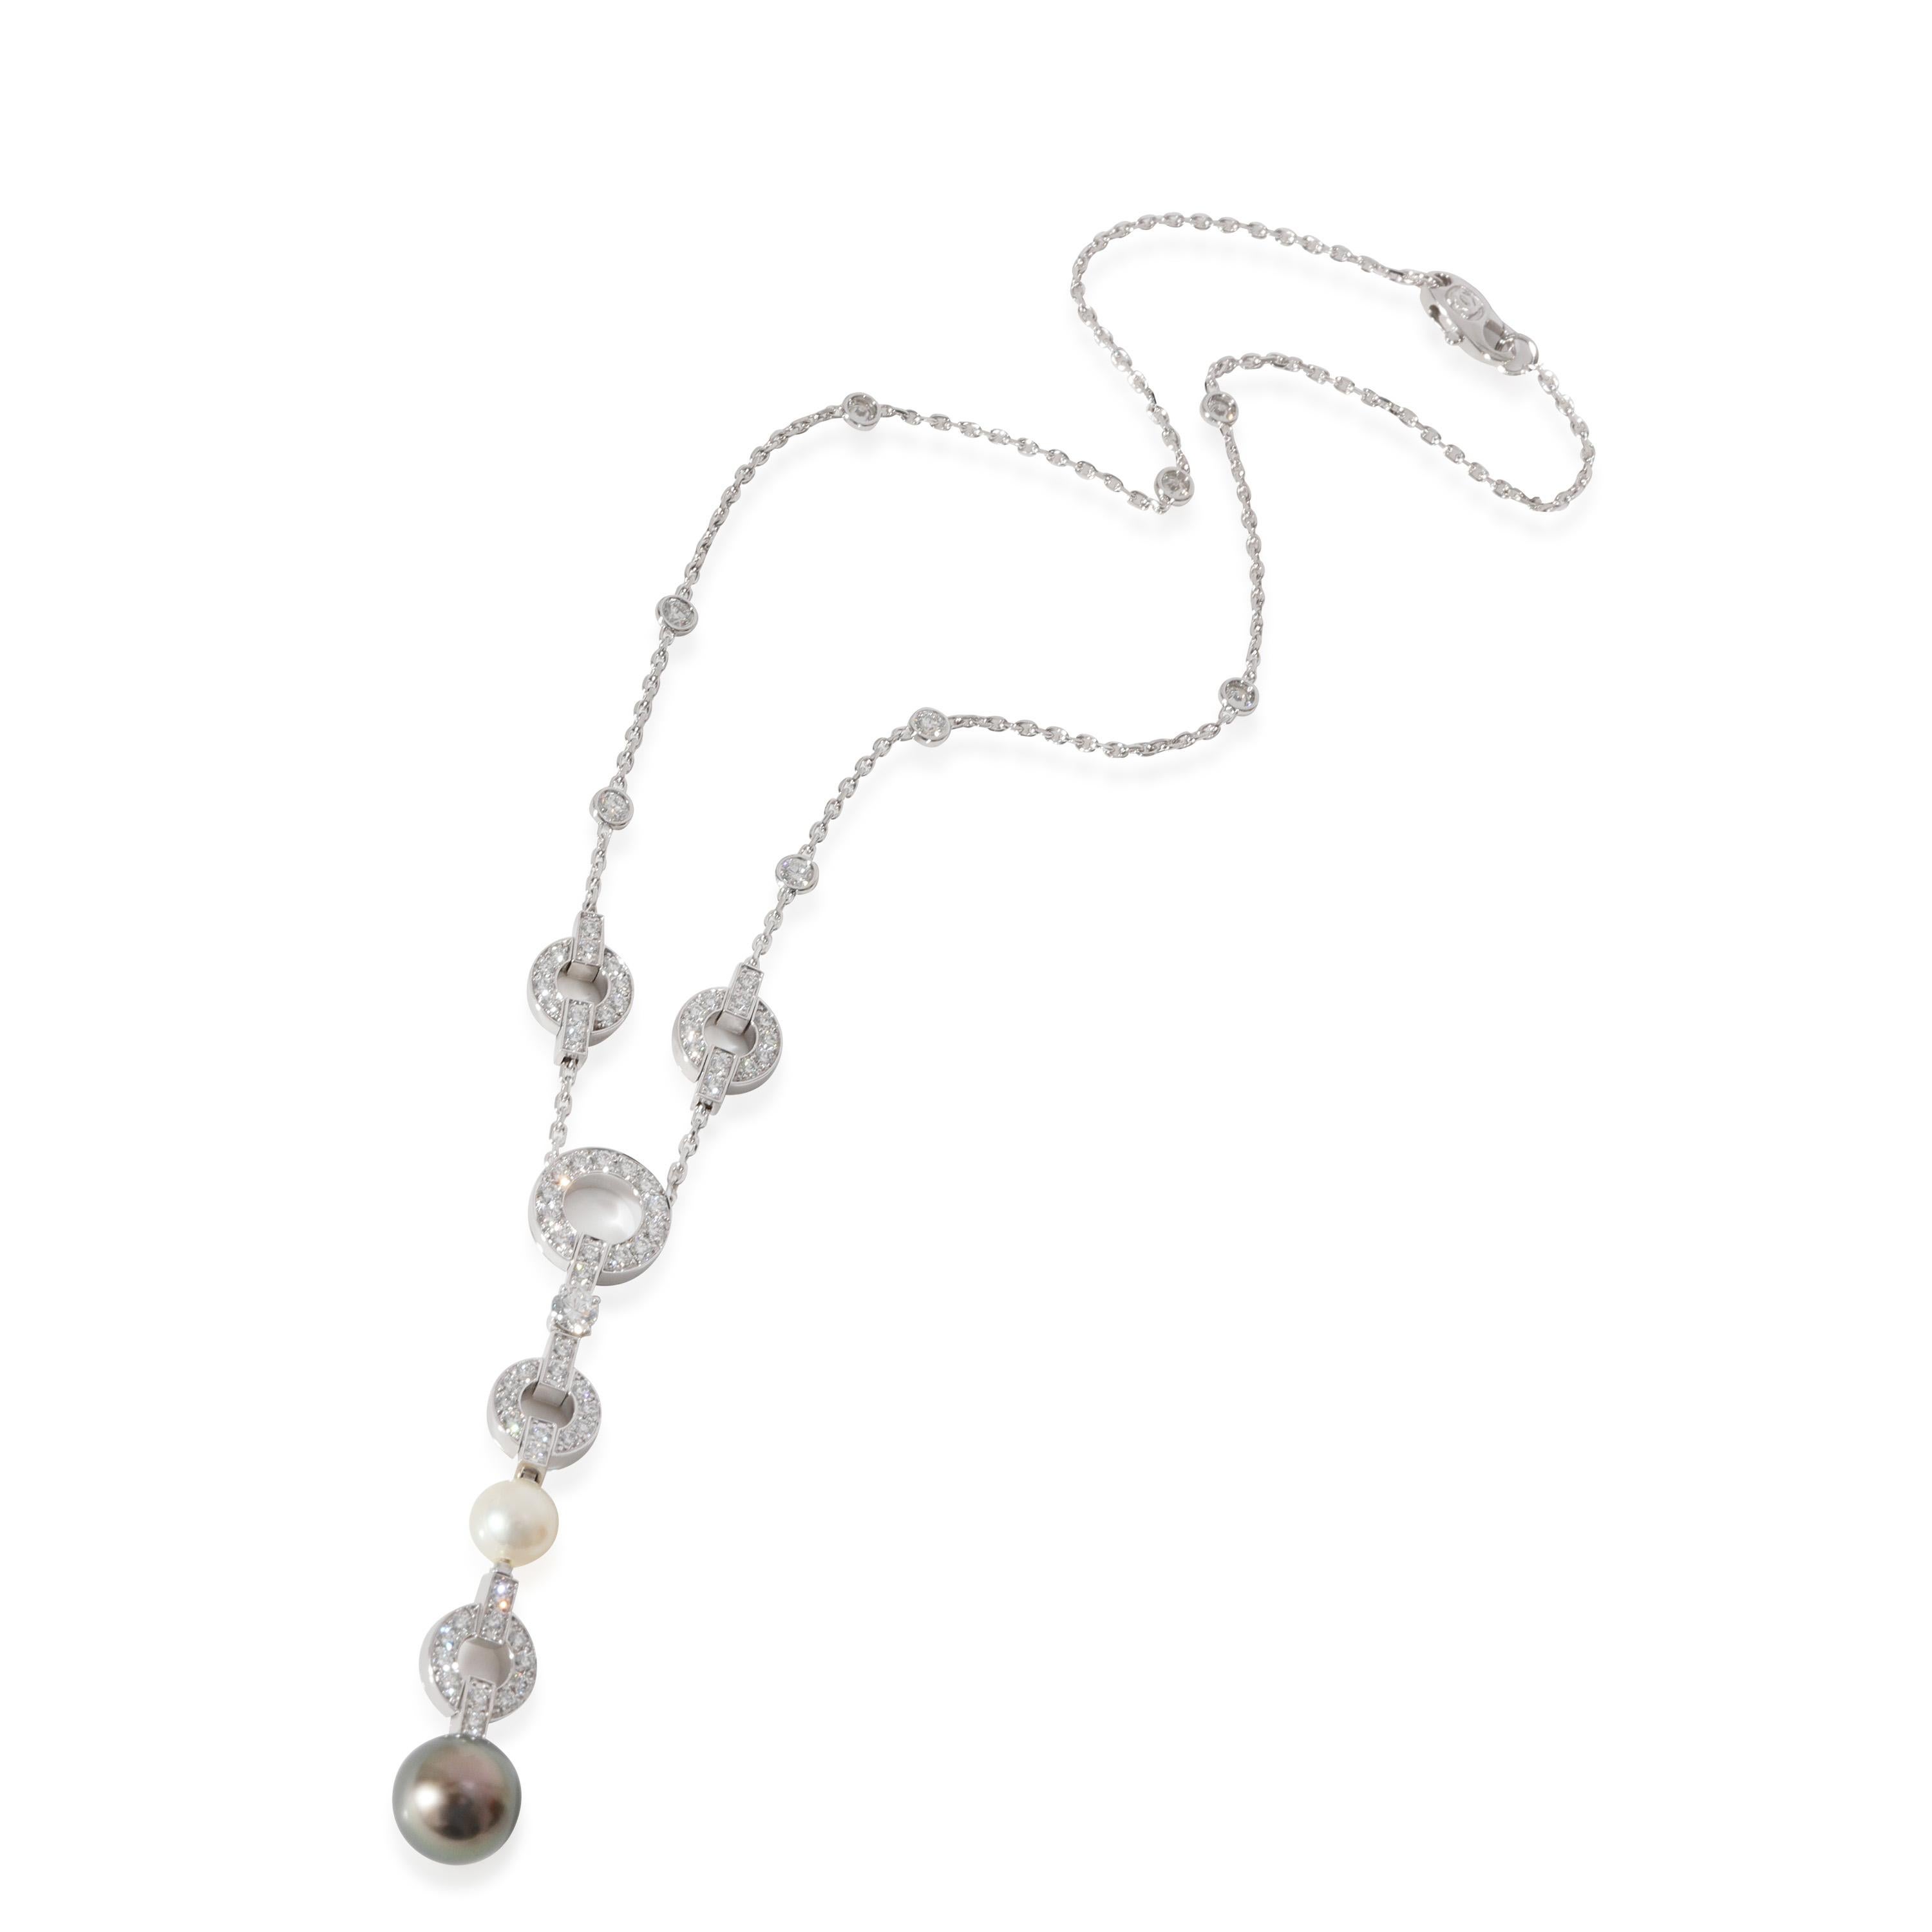 Cartier Himalia Pearl Diamond Necklace in 18k White Gold 2.5 CTW

PRIMARY DETAILS
SKU: 120882
Listing Title: Cartier Himalia Pearl Diamond Necklace in 18k White Gold 2.5 CTW
Condition Description: Retails for 45000 USD. In excellent condition and